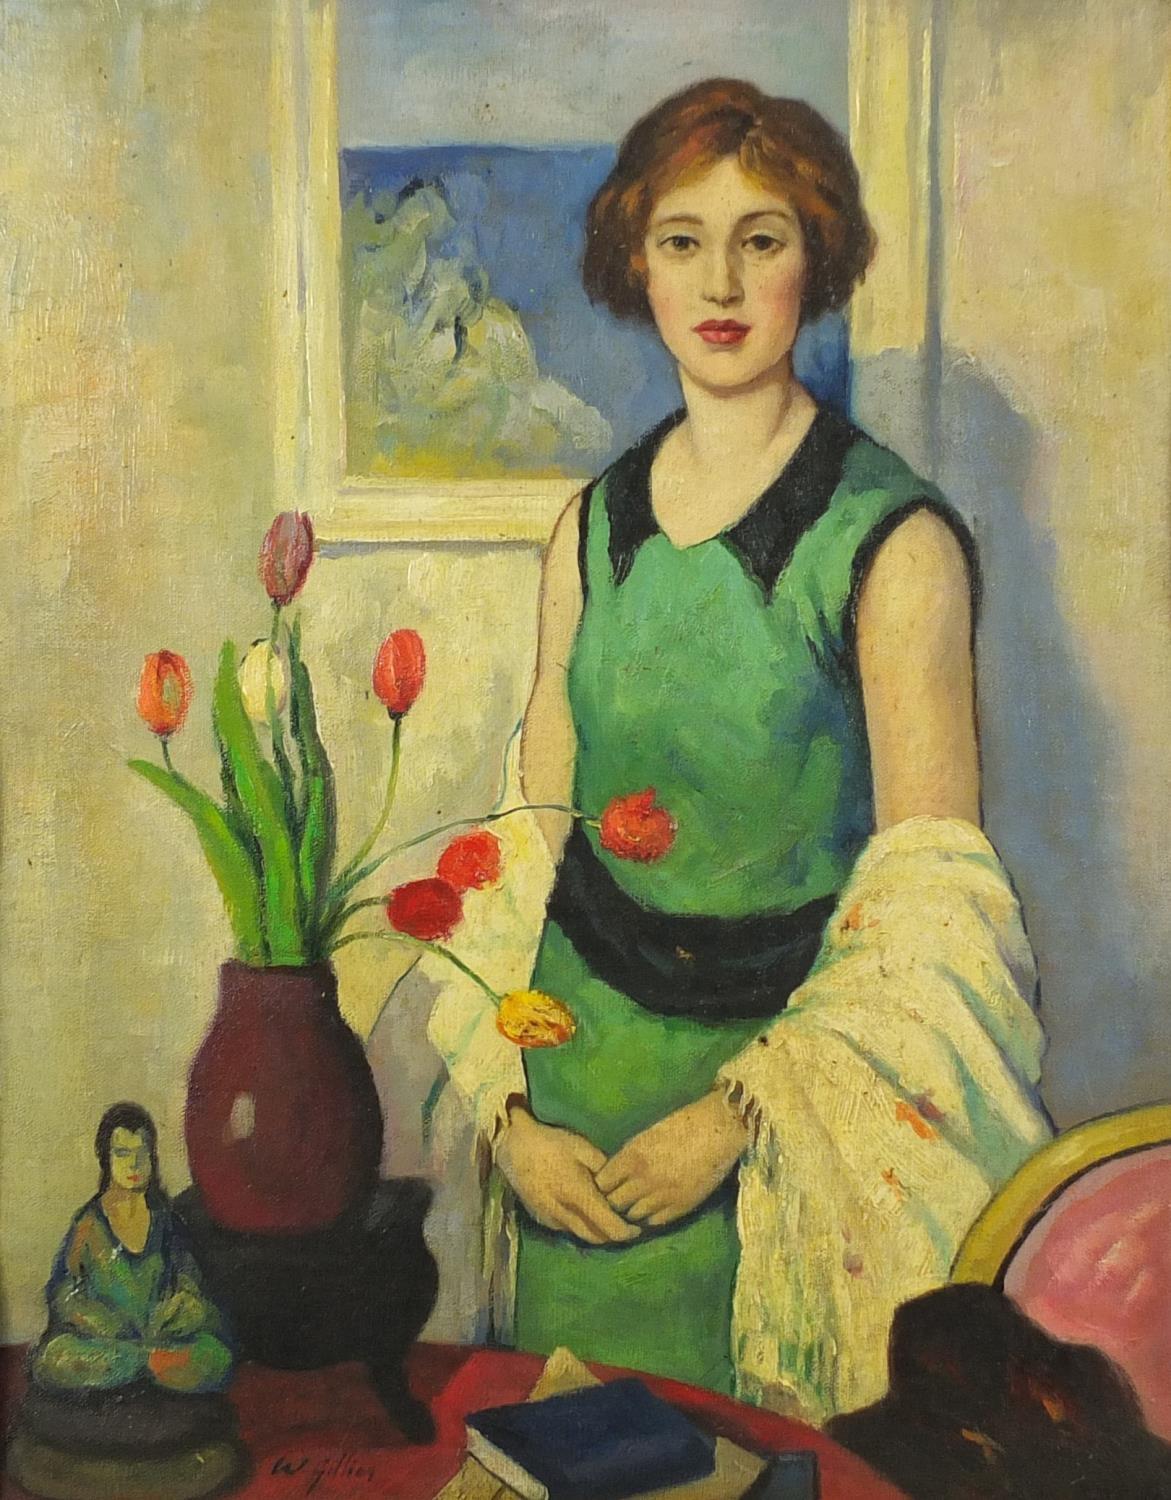 Manner of William George Gillies - Female in an interior with flowers in a vase, Scottish